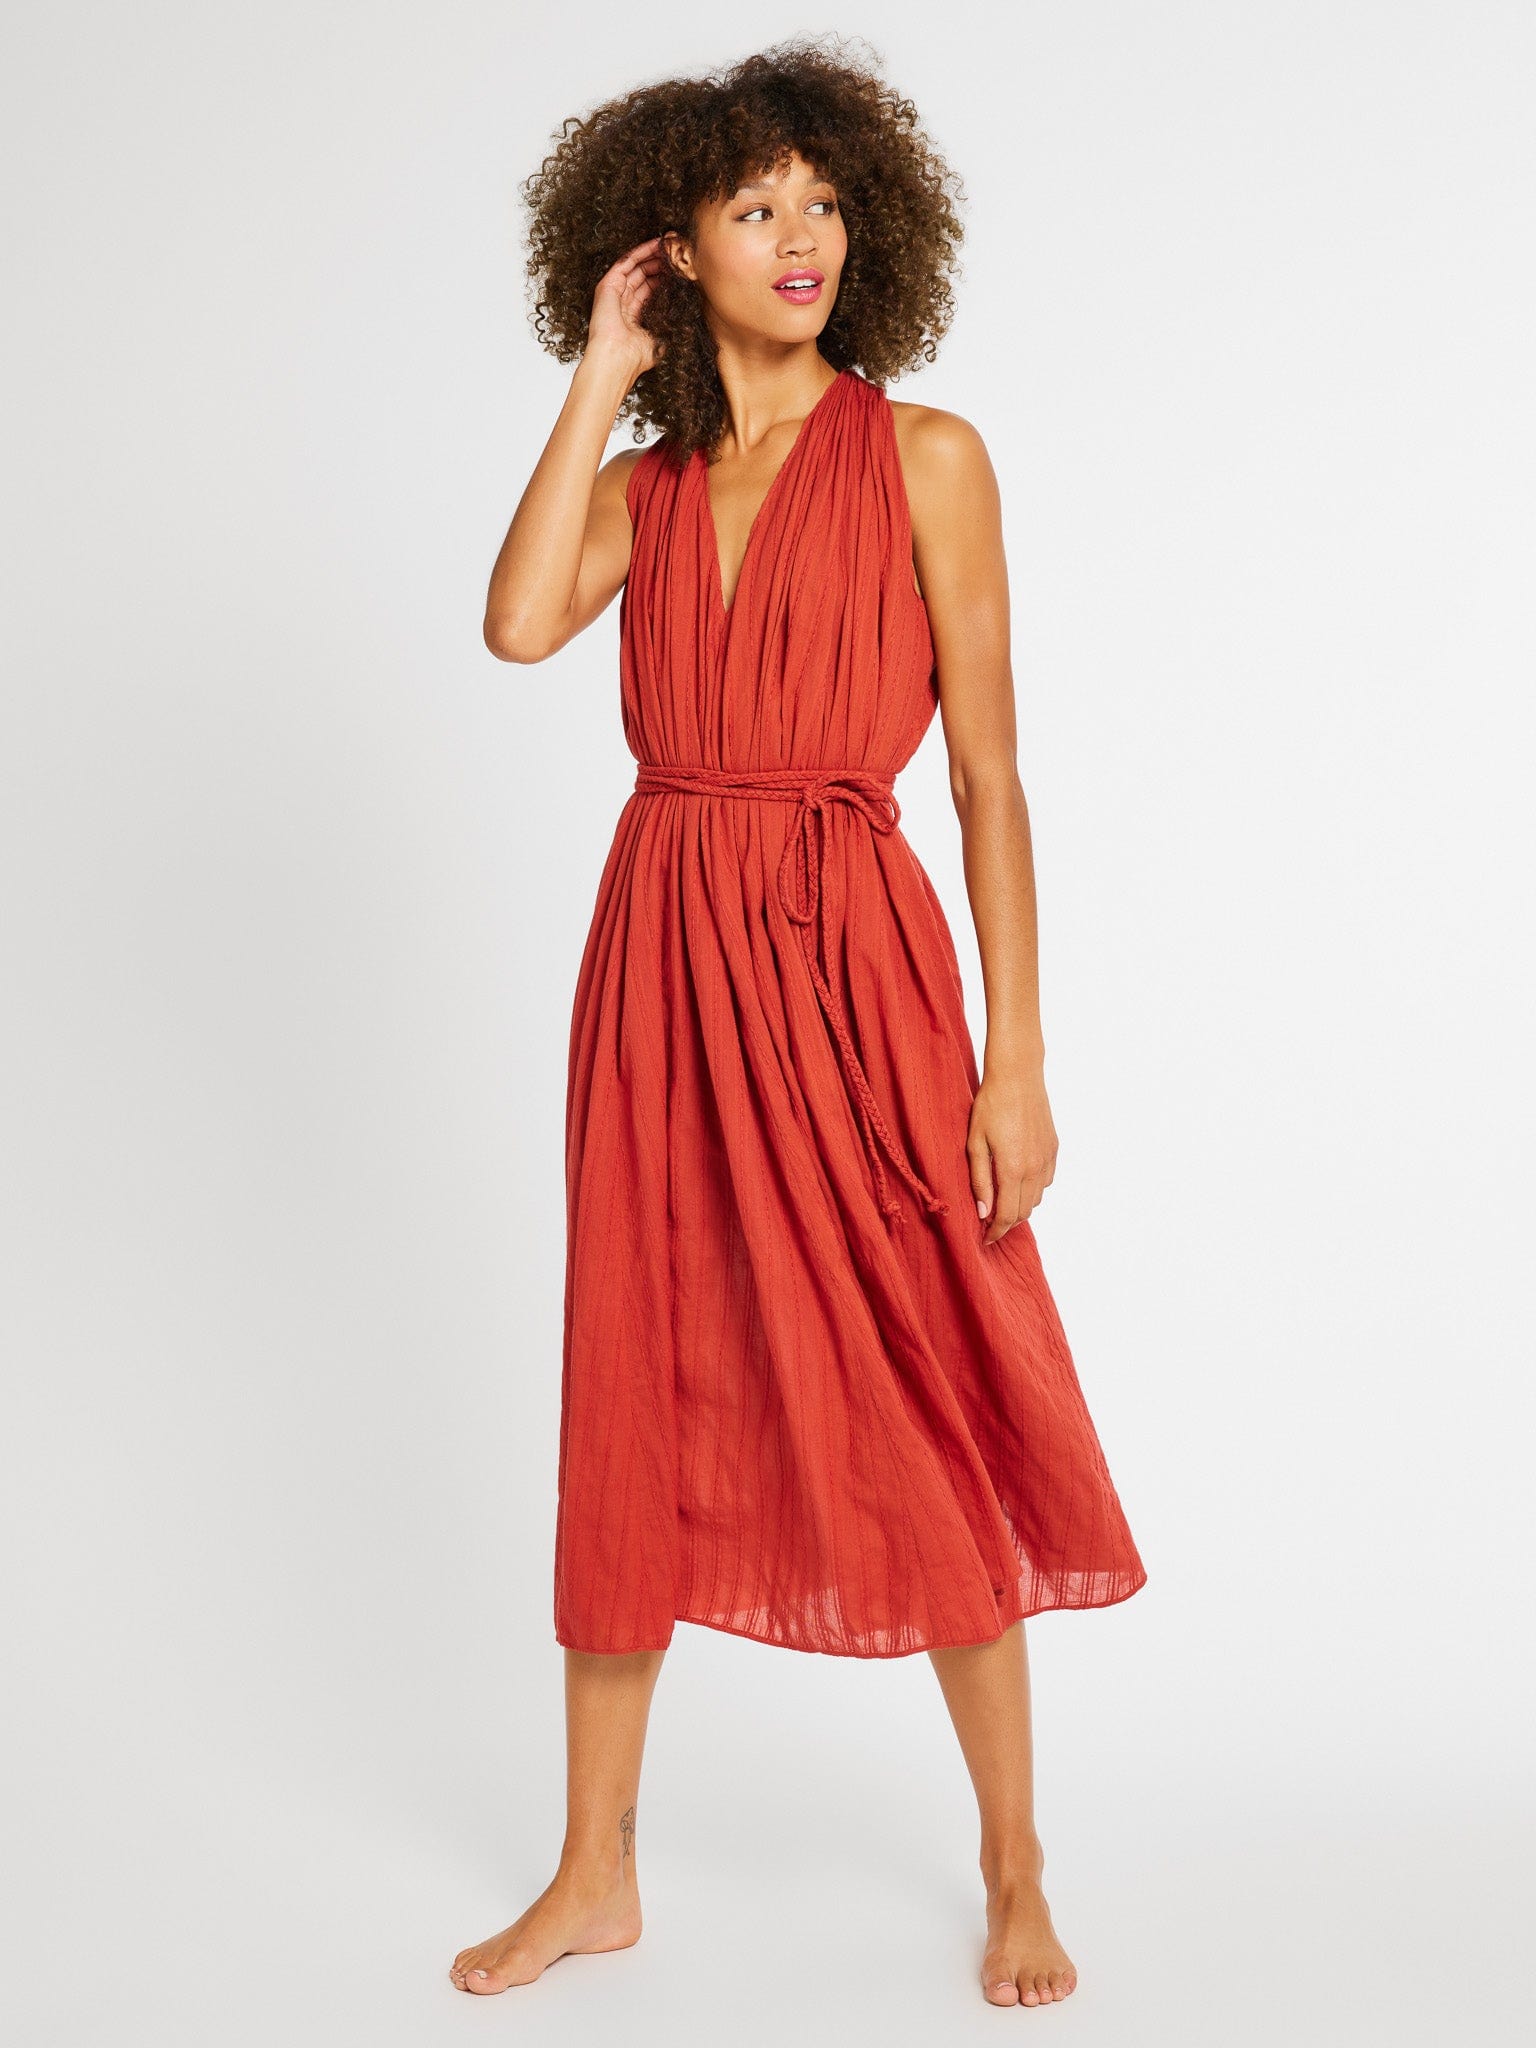 MILLE Clothing Marilyn Dress in Spice